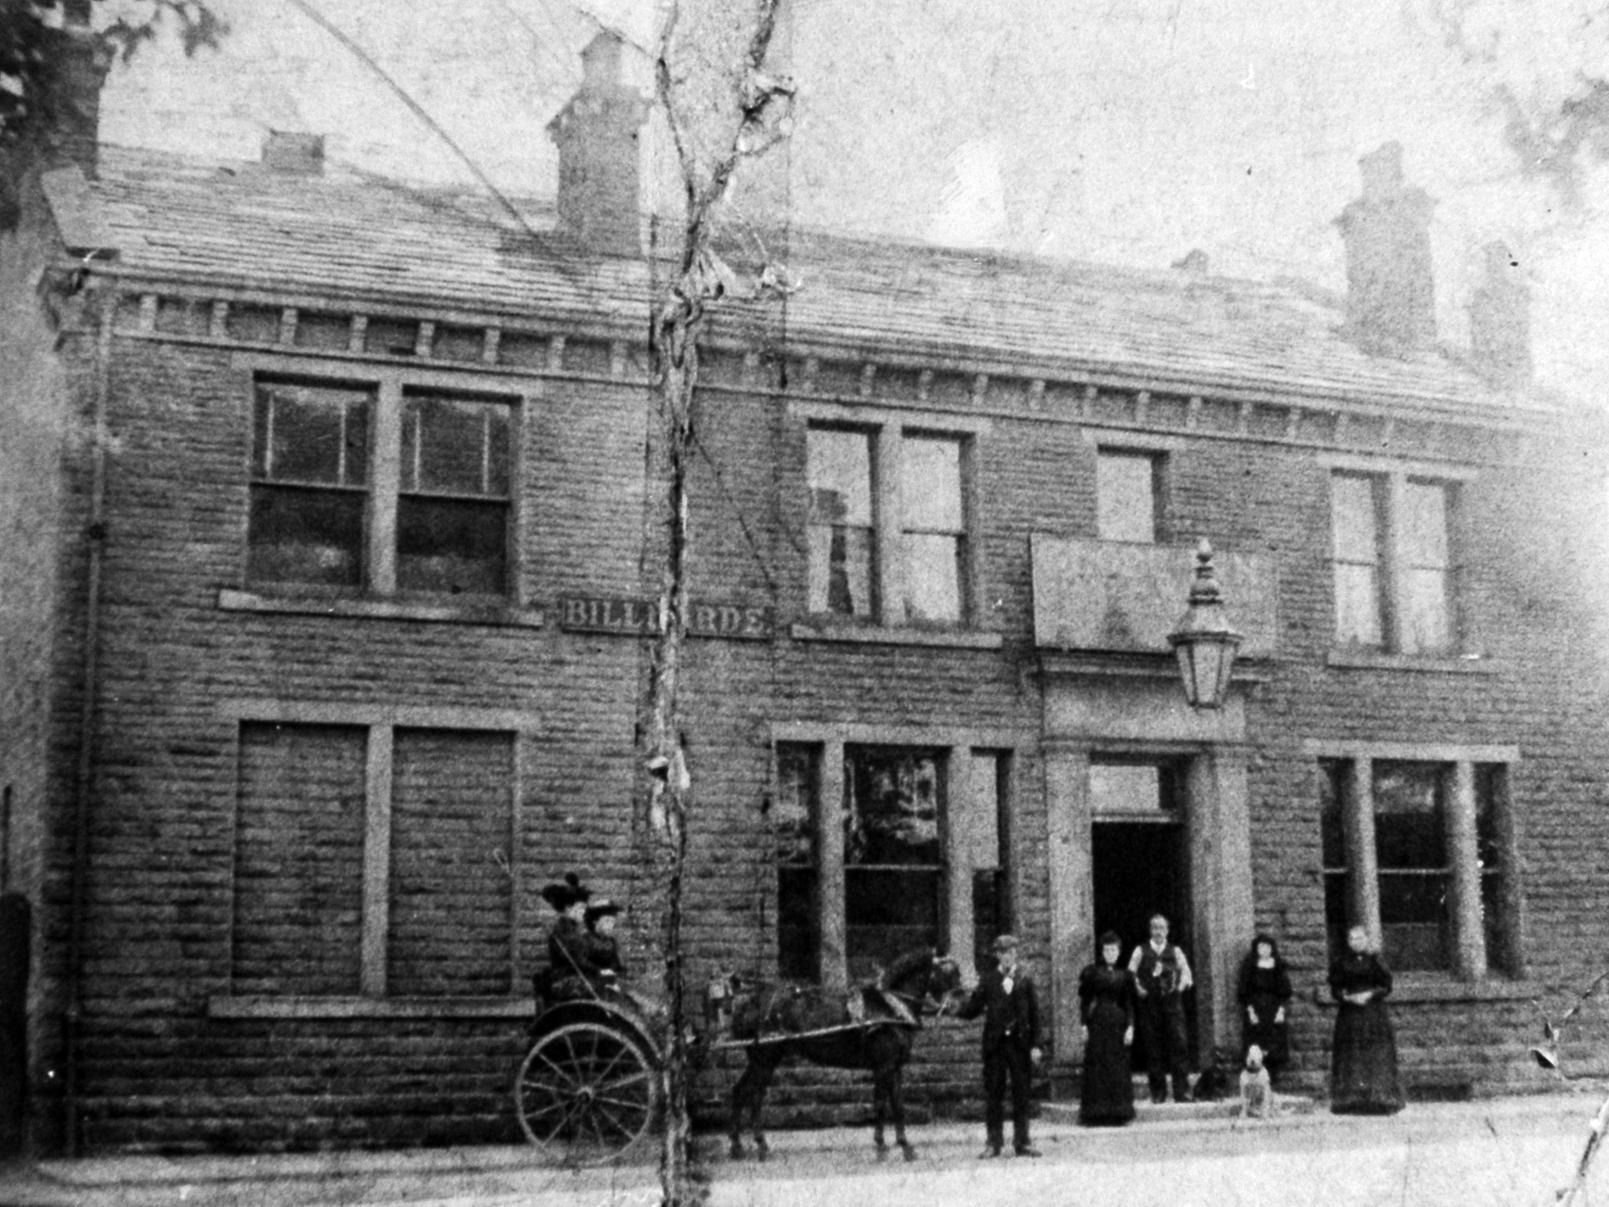 The Globe Inn on the corner of Bramley Town Street and Broad Lane. The photo was taken more than 140 years ago when the licensees were James and Ellen Windsor.